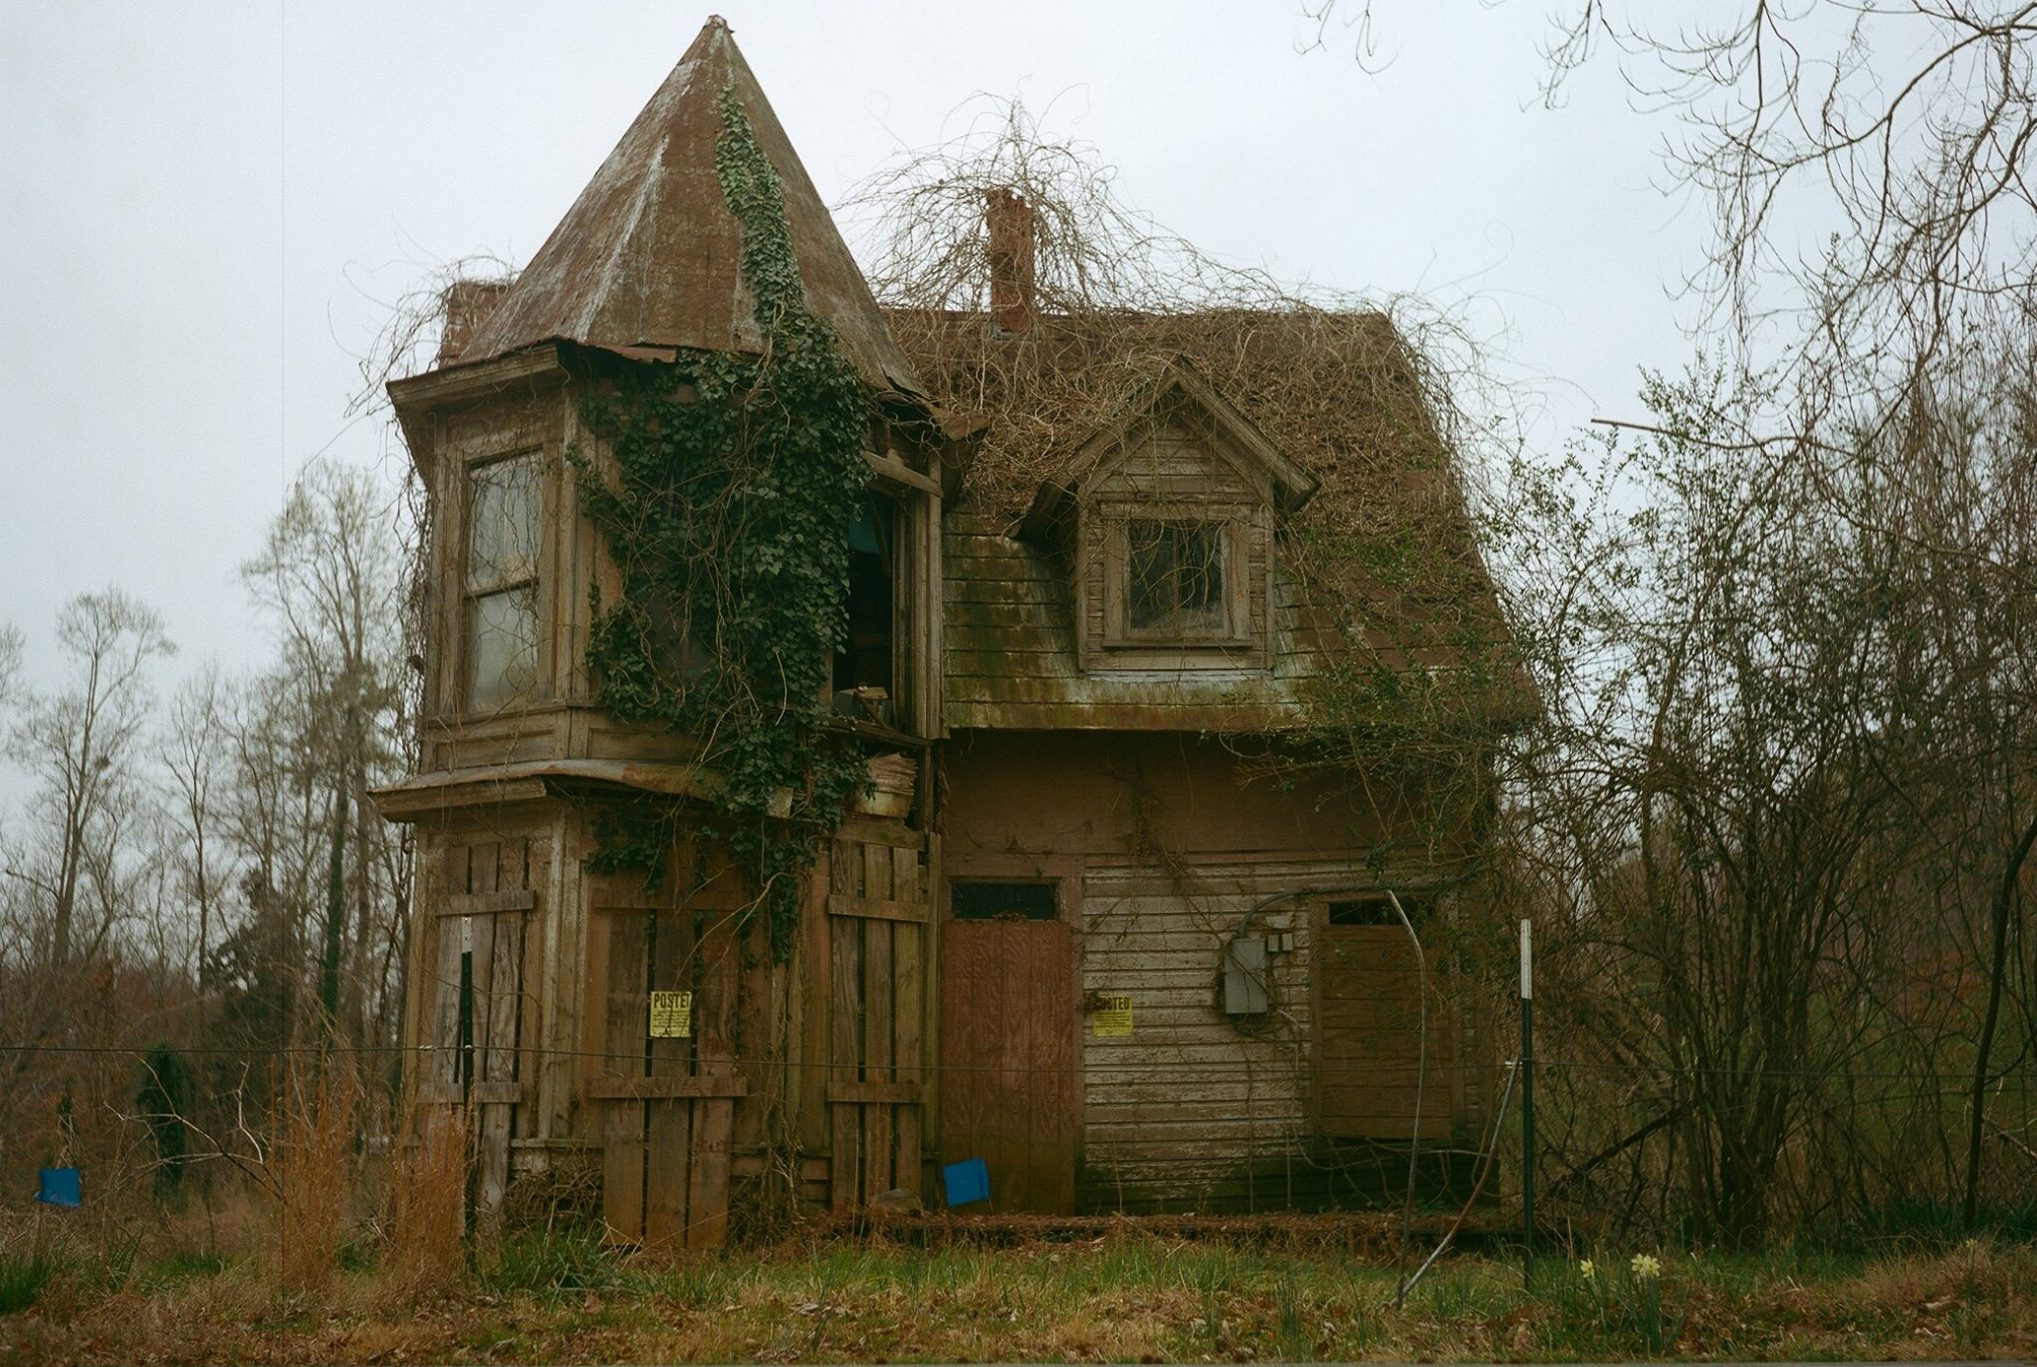 ‘Dreams of Decay’ photography exhibit heads to Huntington Public Library